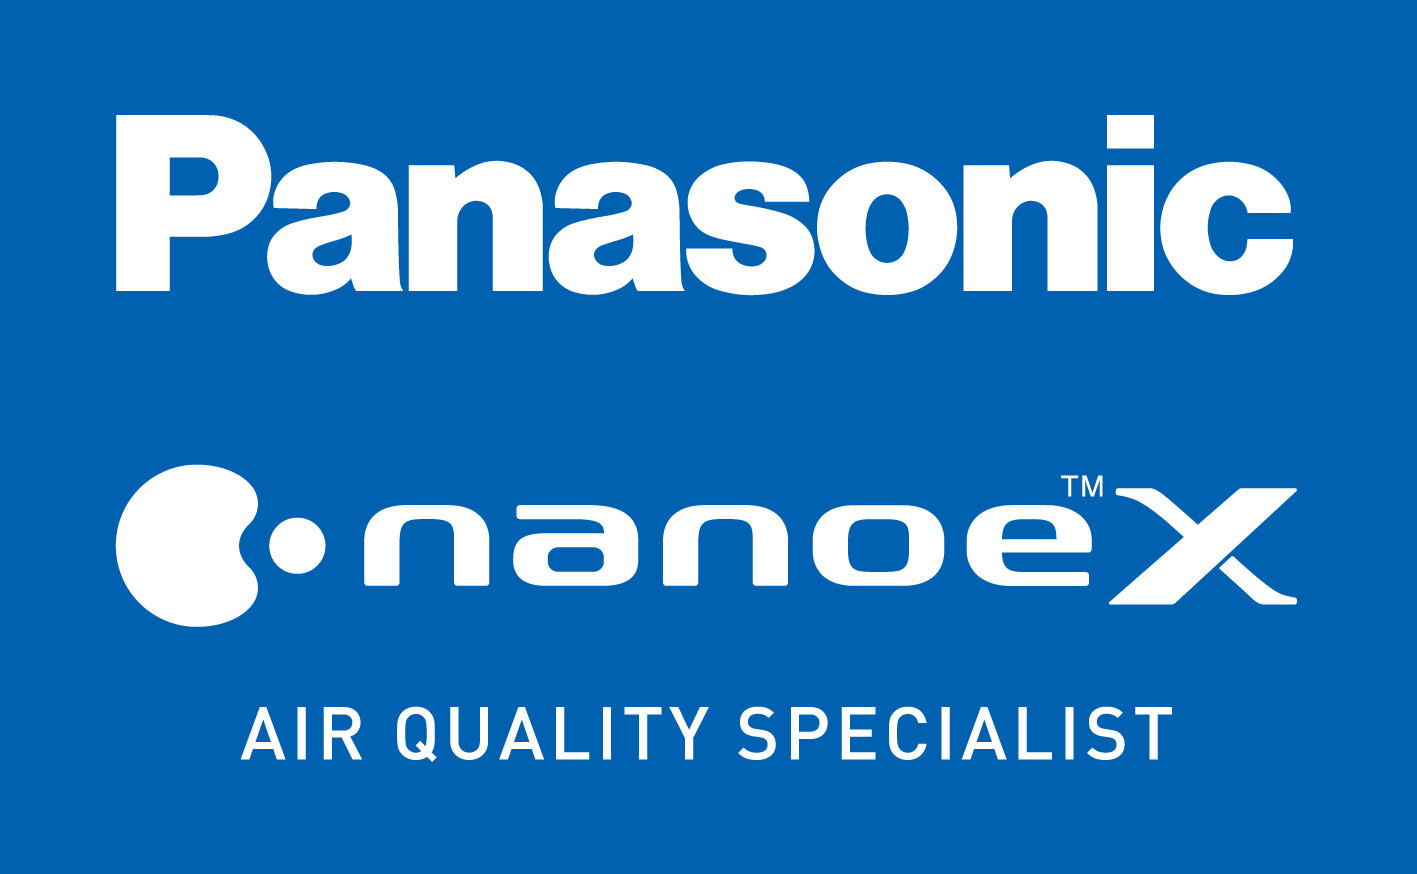 Hunter Valley Appliance Repairs are proud installers of Panasonic NanoeX Air Quality products